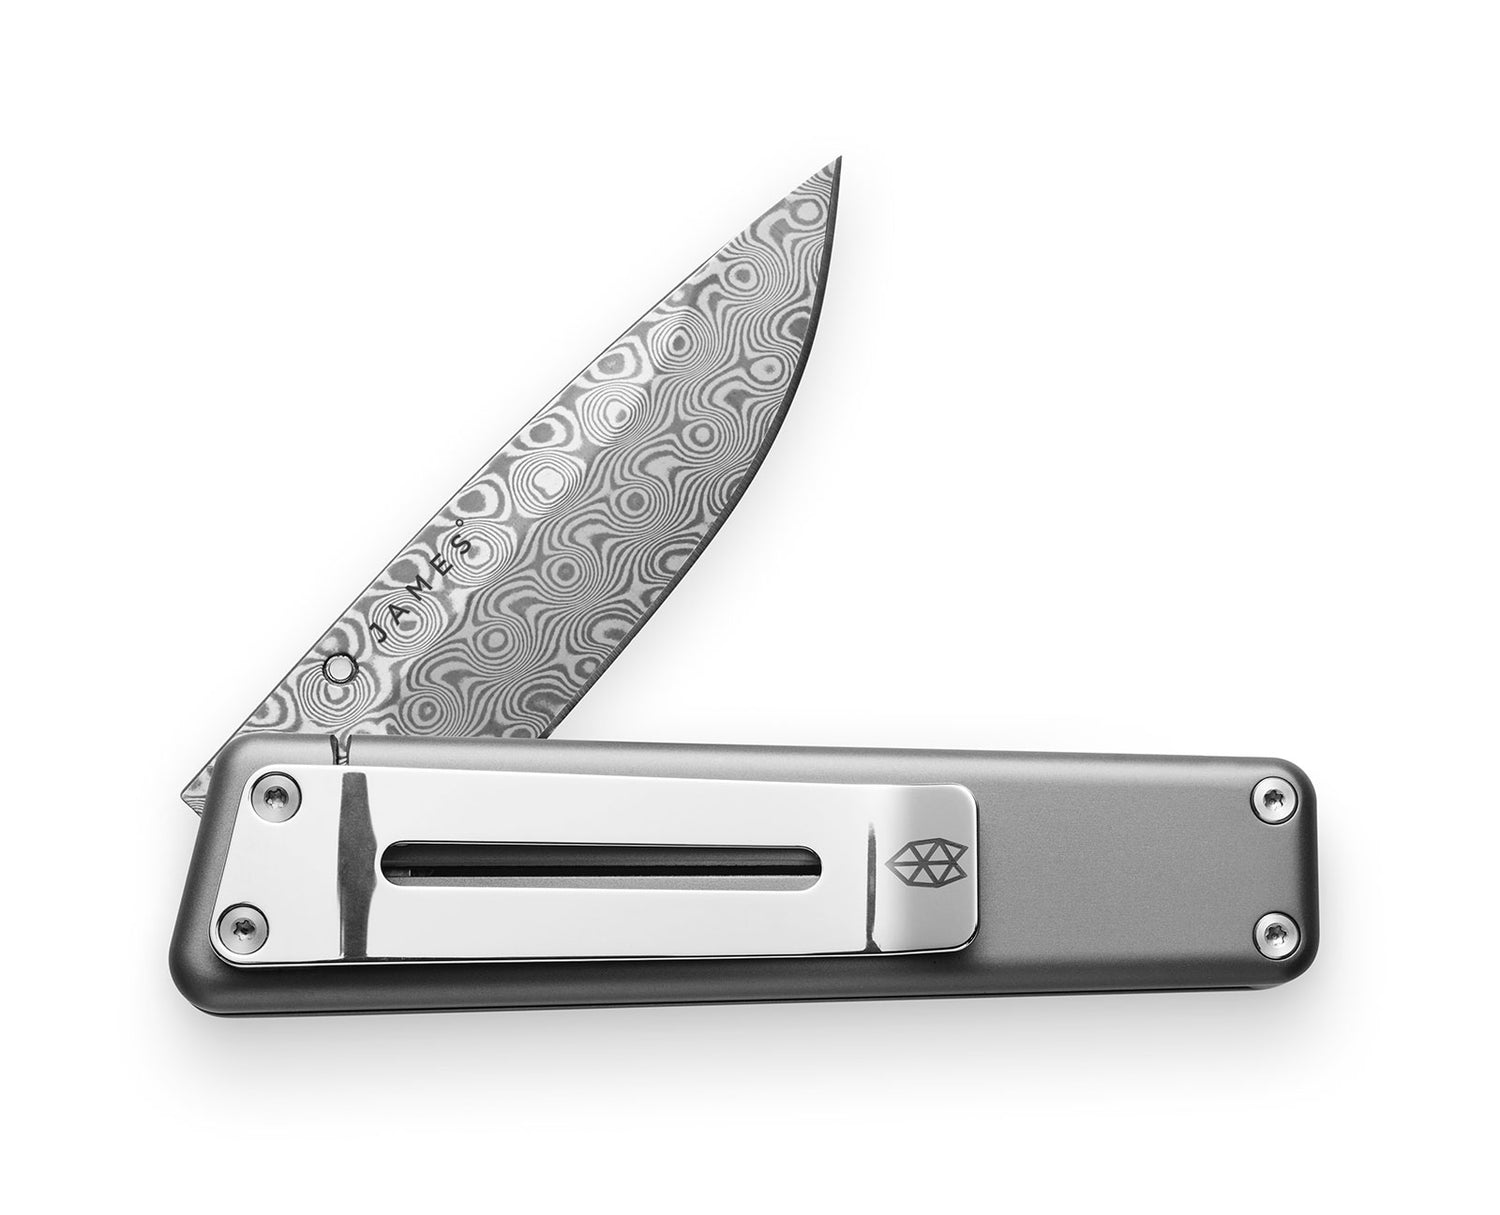 The Chapter knife with titanium handle and decorative, stainless steel blade.